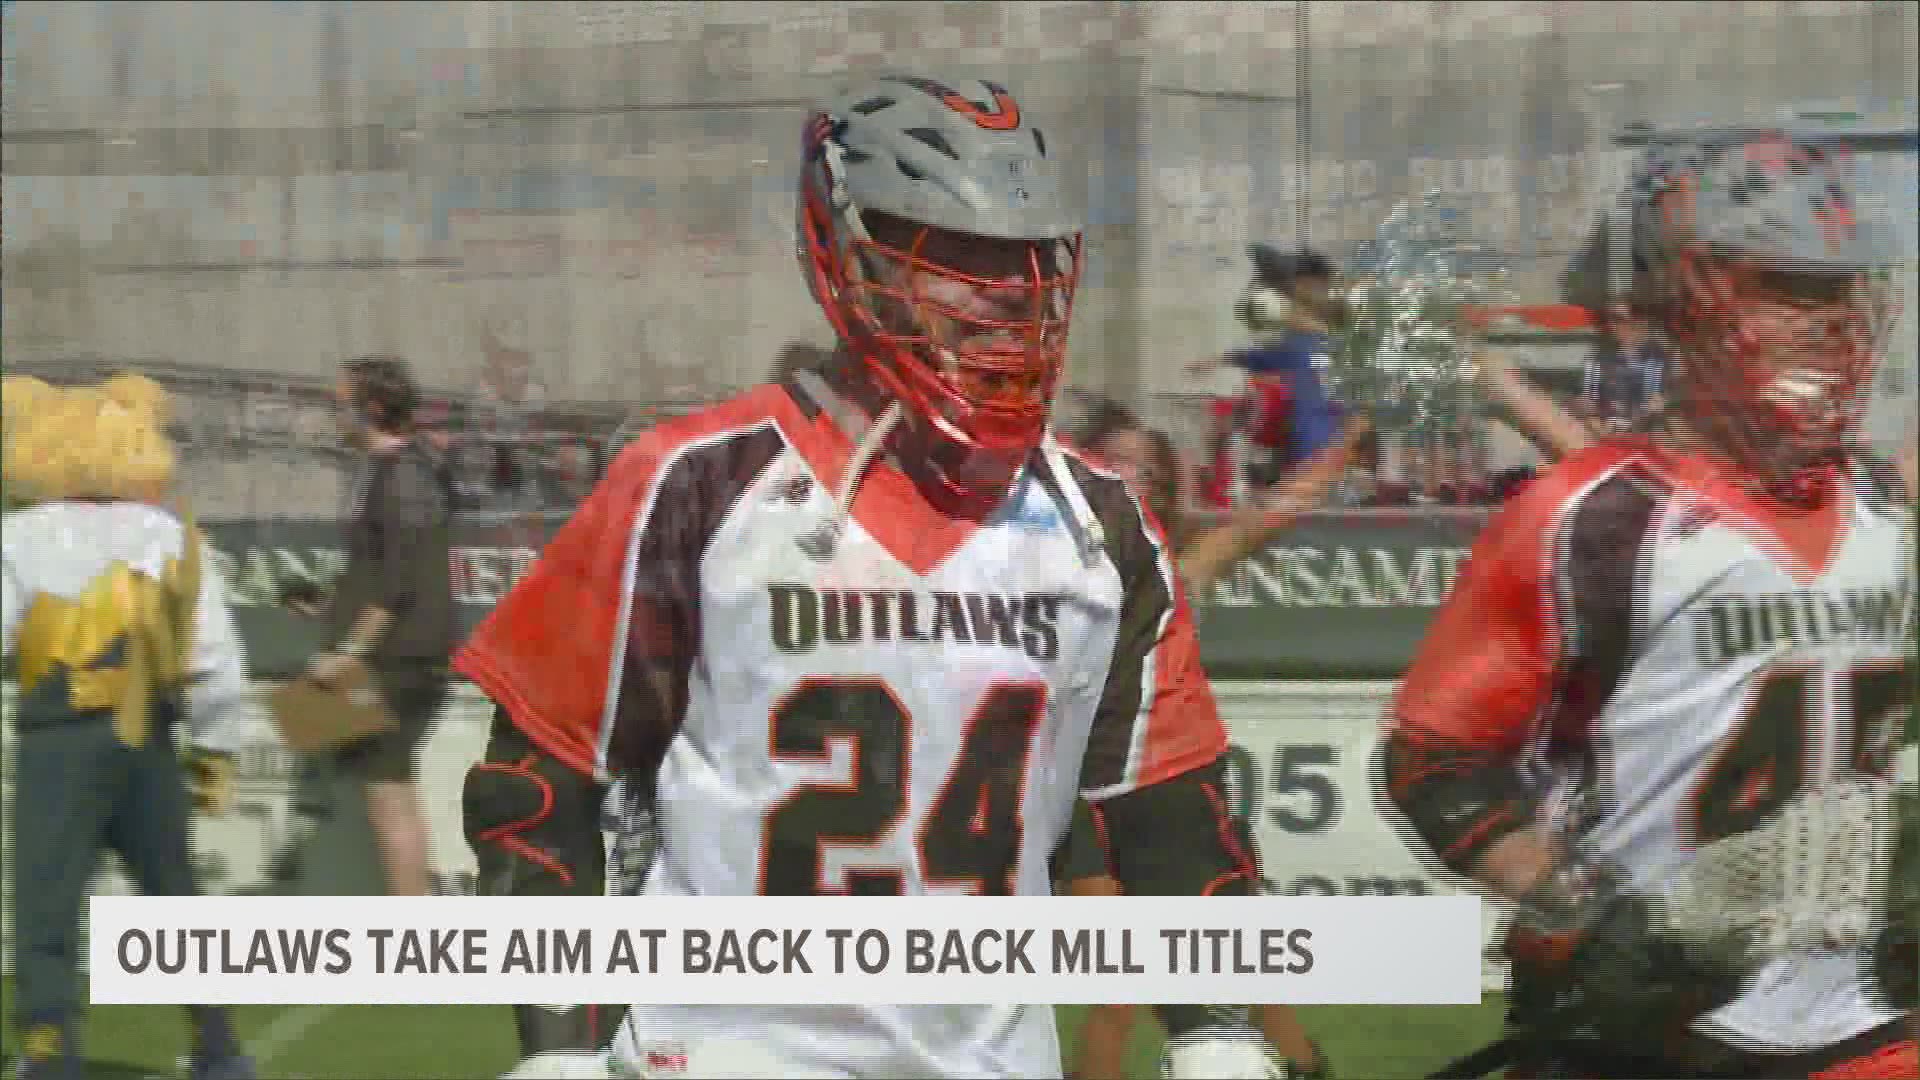 The Outlaws took a 9-8 lead late in the game, before losing by a final score of 10-9.